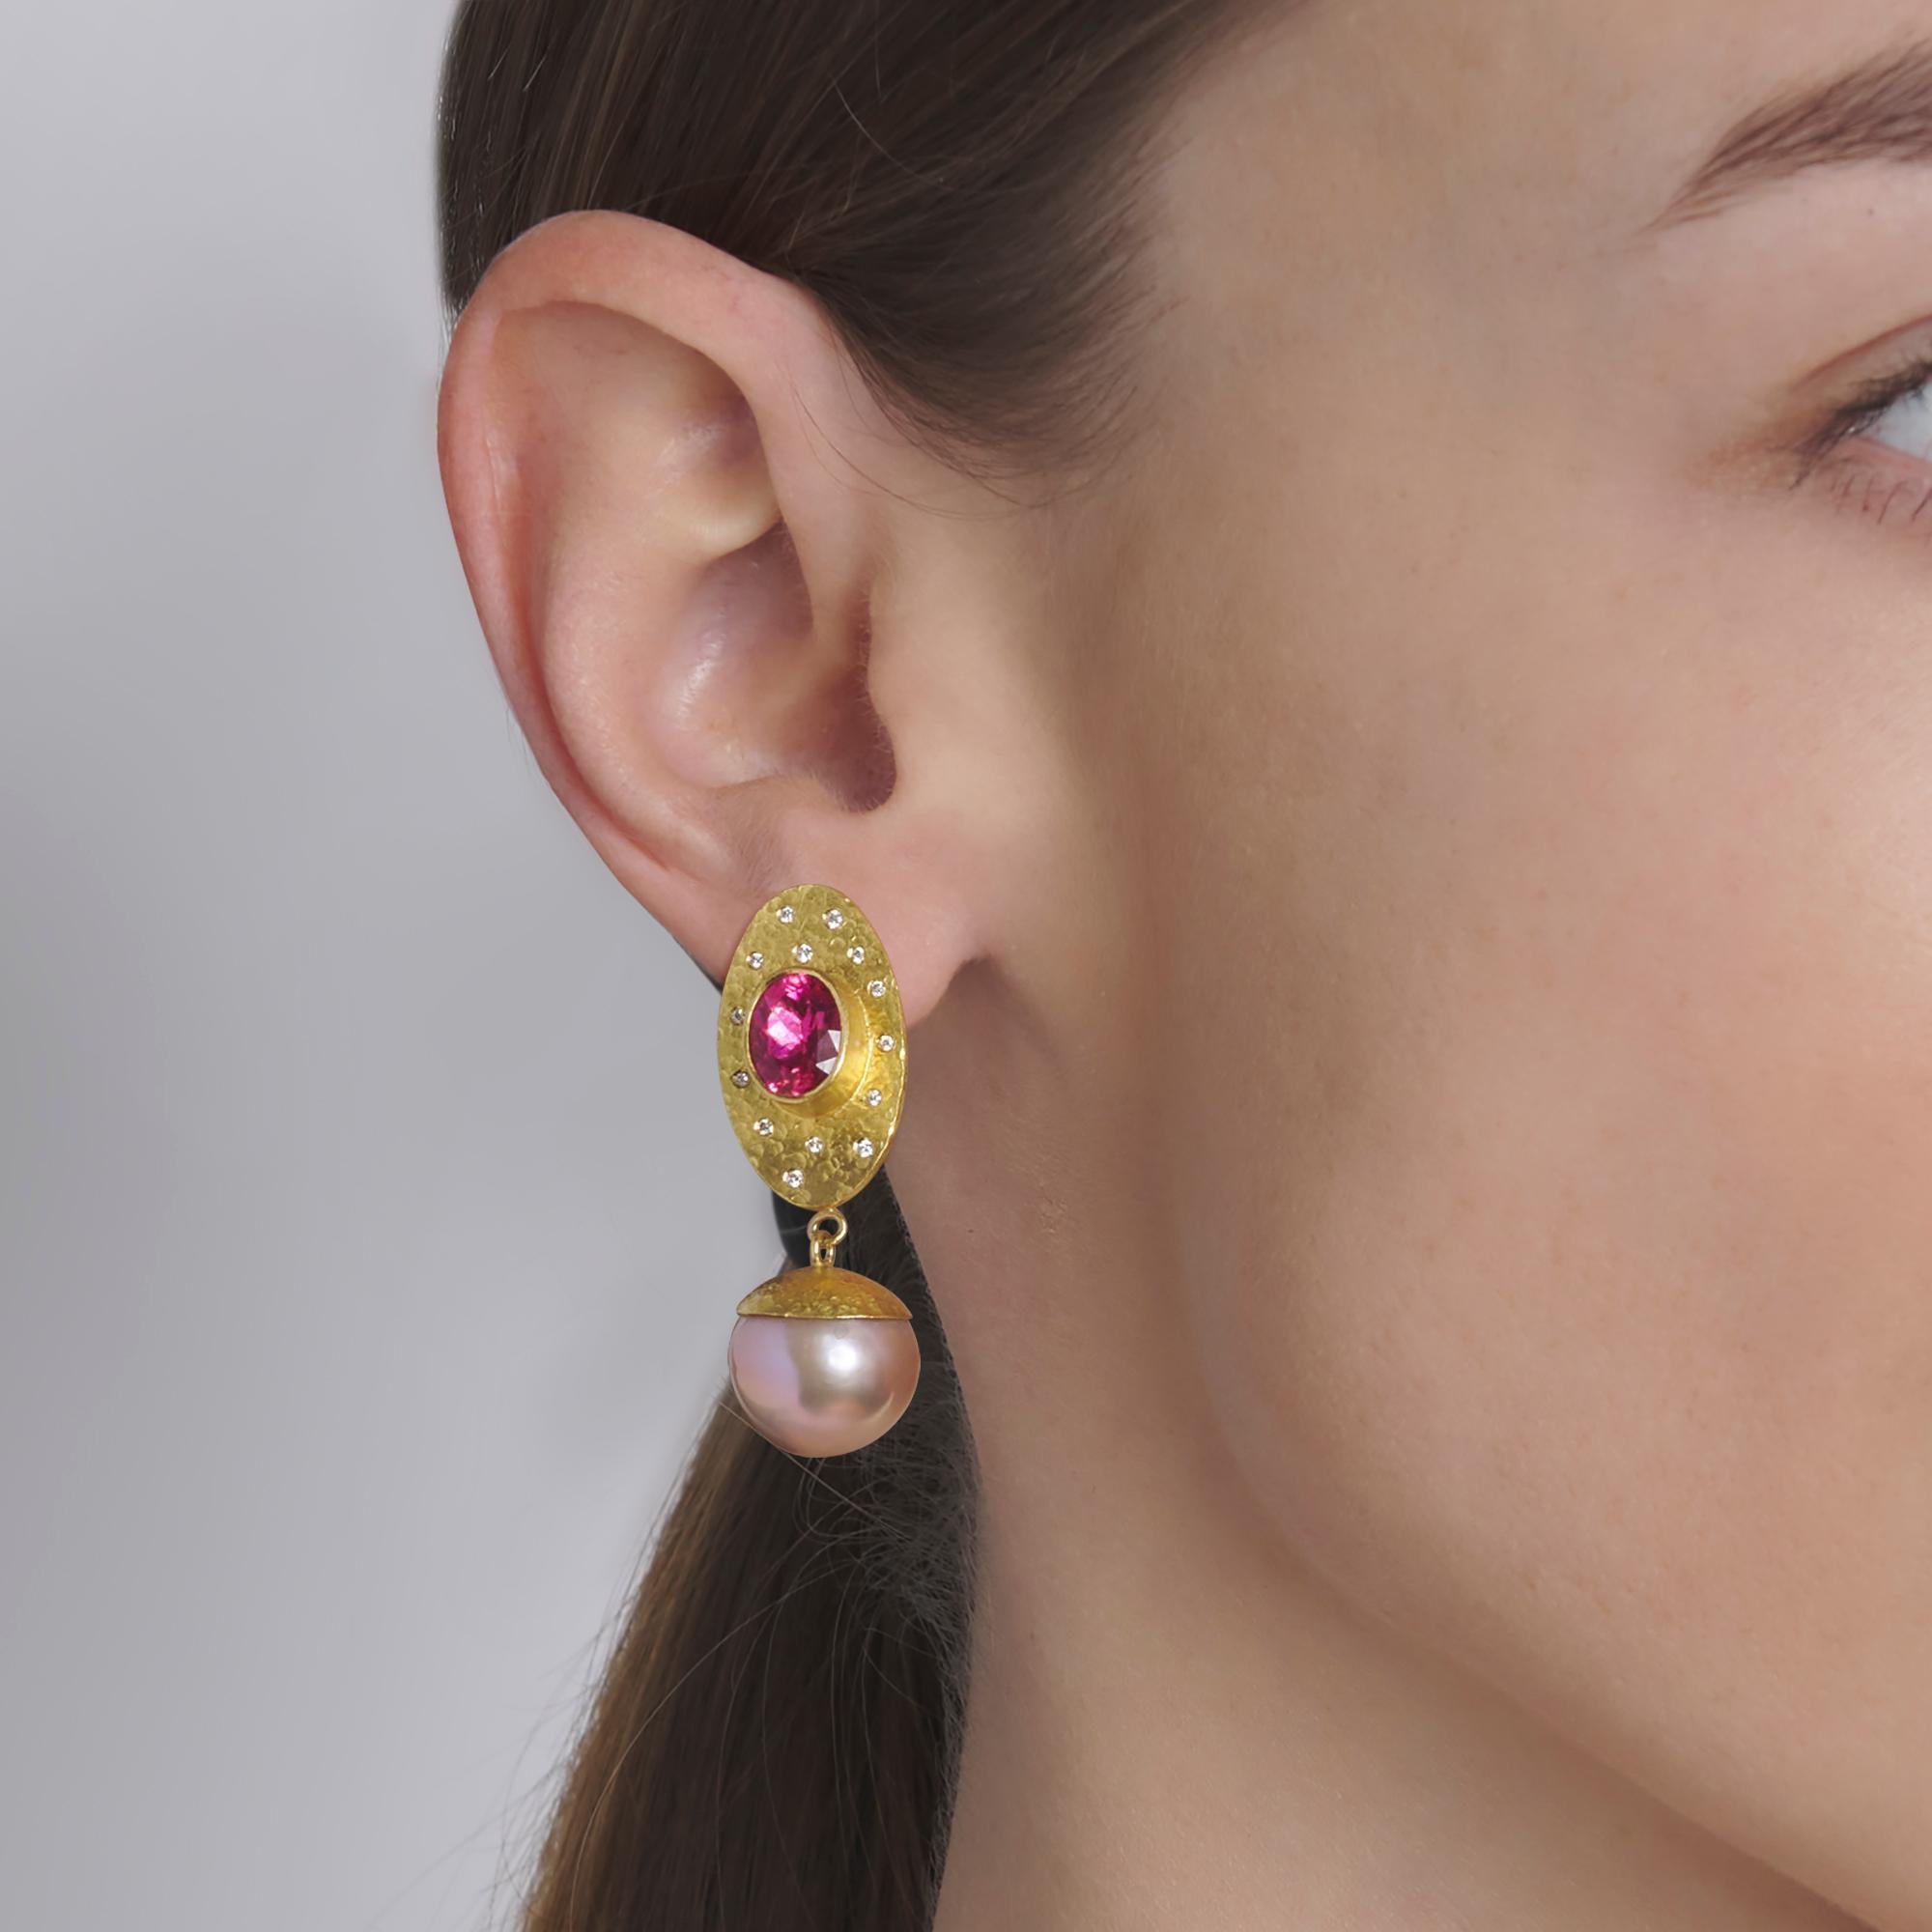 These exquisite earrings won the 2017 Niche Award for Fine Jewelry.

Beautiful, bright and very clean, oval shaped rubellite tourmalines (2.16 carats) are wrapped in bezels of 22 karat yellow gold.  The rubellite tourmalines sit on large ovals of